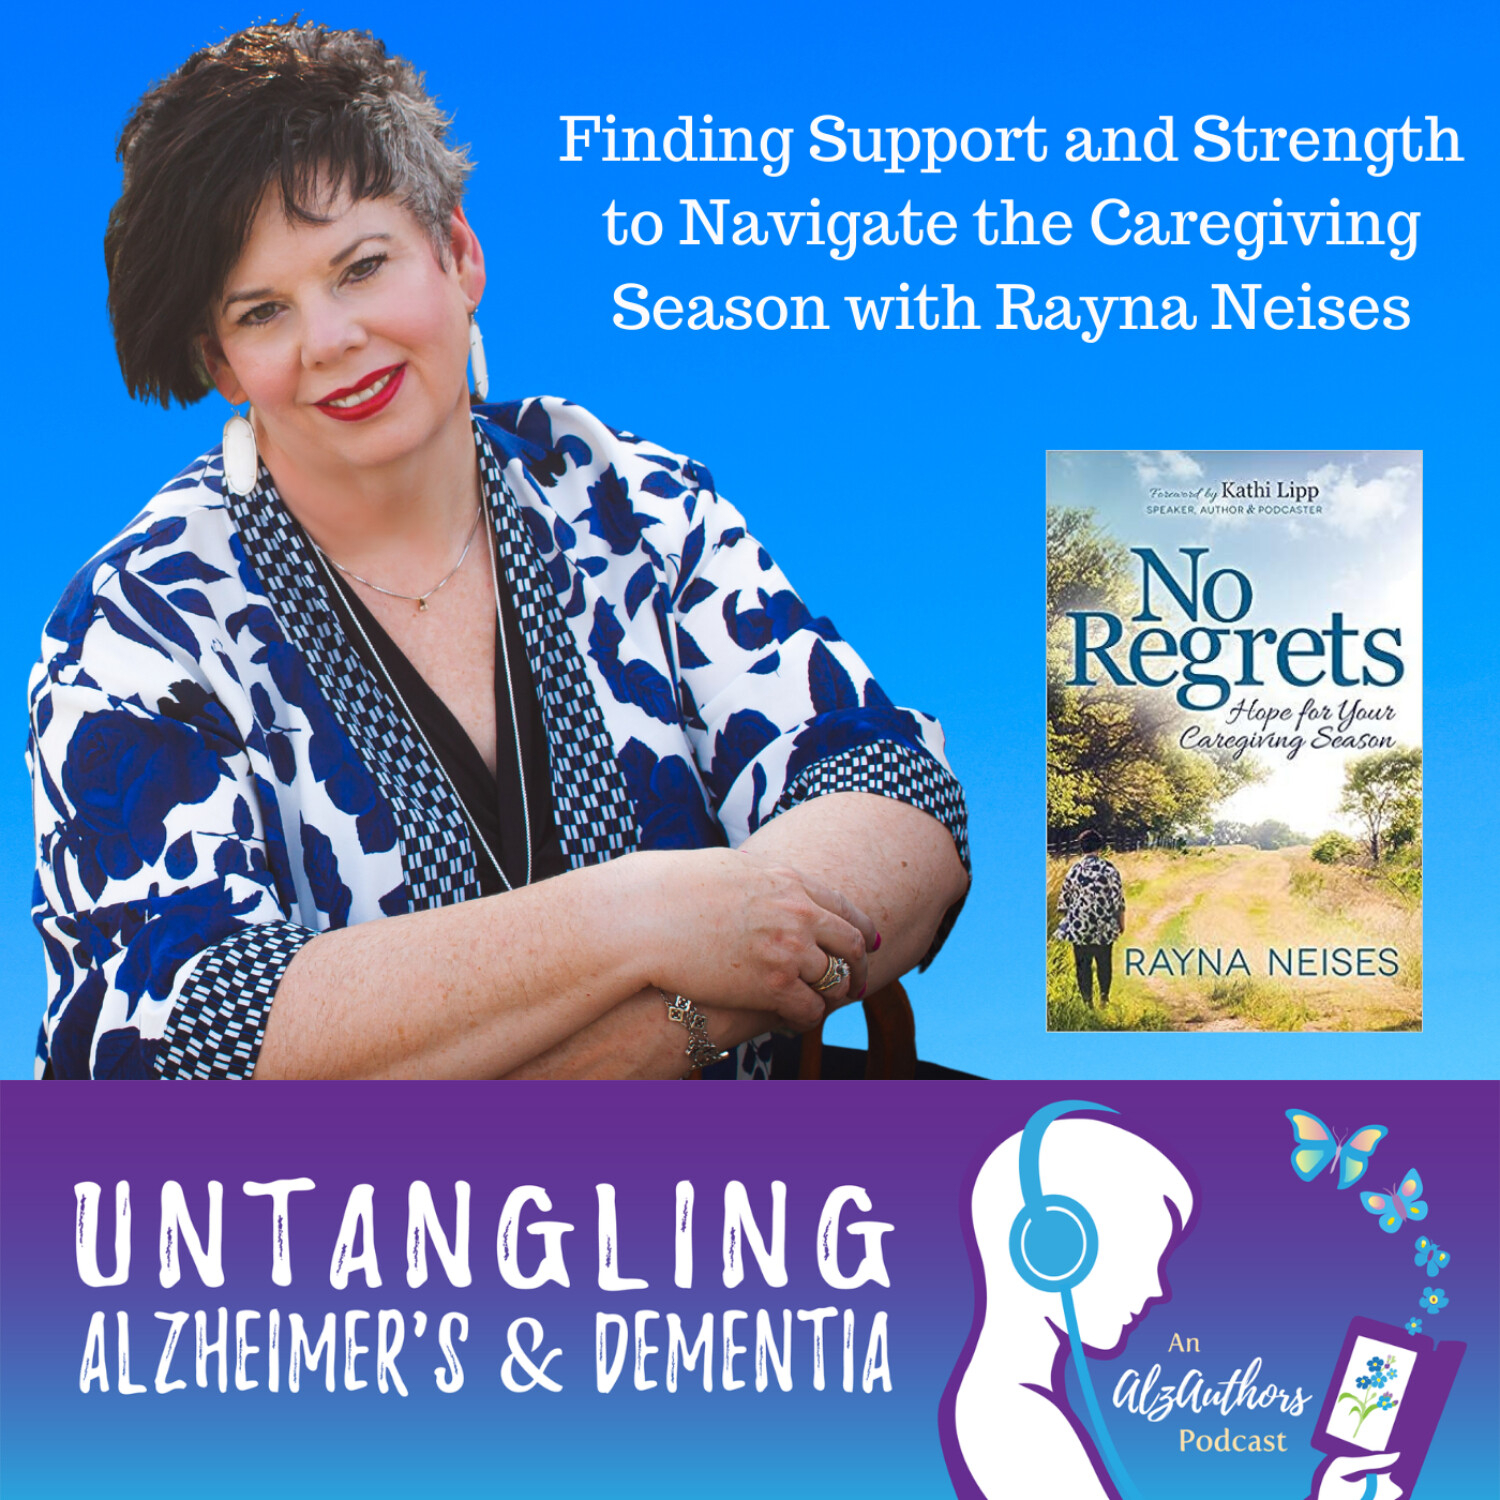 Finding Support and Strength to Navigate the Caregiving Season with Rayna Neises